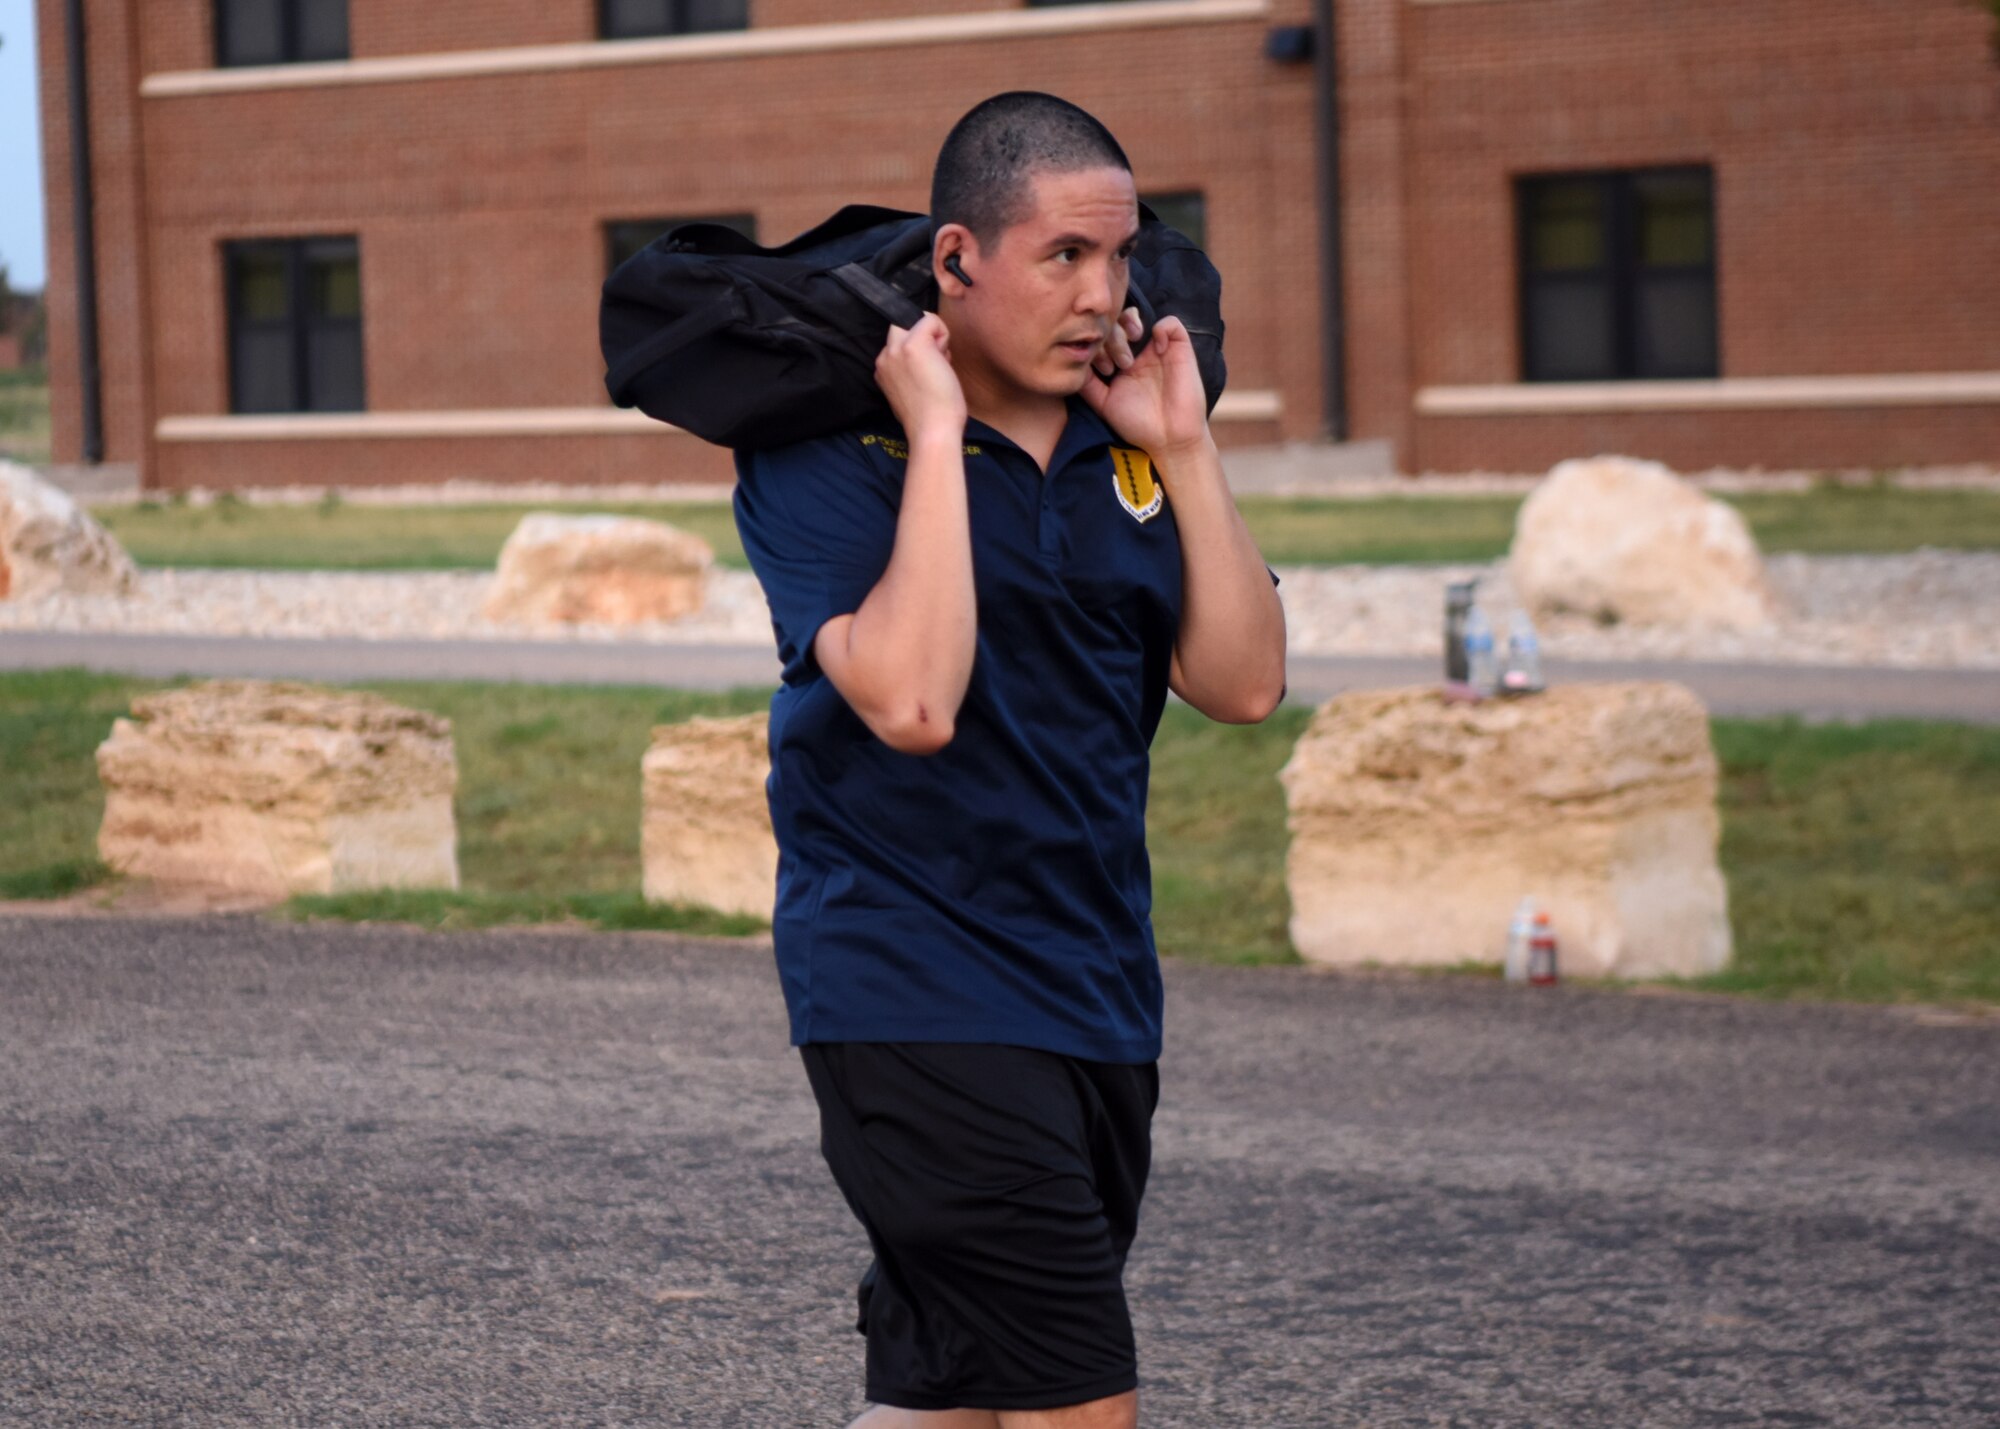 U.S. Air Force Capt. Ishmael, 17th Training Wing executive officer, rucks with weight on his shoulders during the Celebration of You run on Goodfellow Air Force Base, Texas, Sept. 17, 2020. Runners could walk, run, ruck, hop, or skip their way through the course to celebrate the Air Force’s 73rd Birthday. (U.S. Air Force photo by Airman 1st Class Ethan Sherwood)